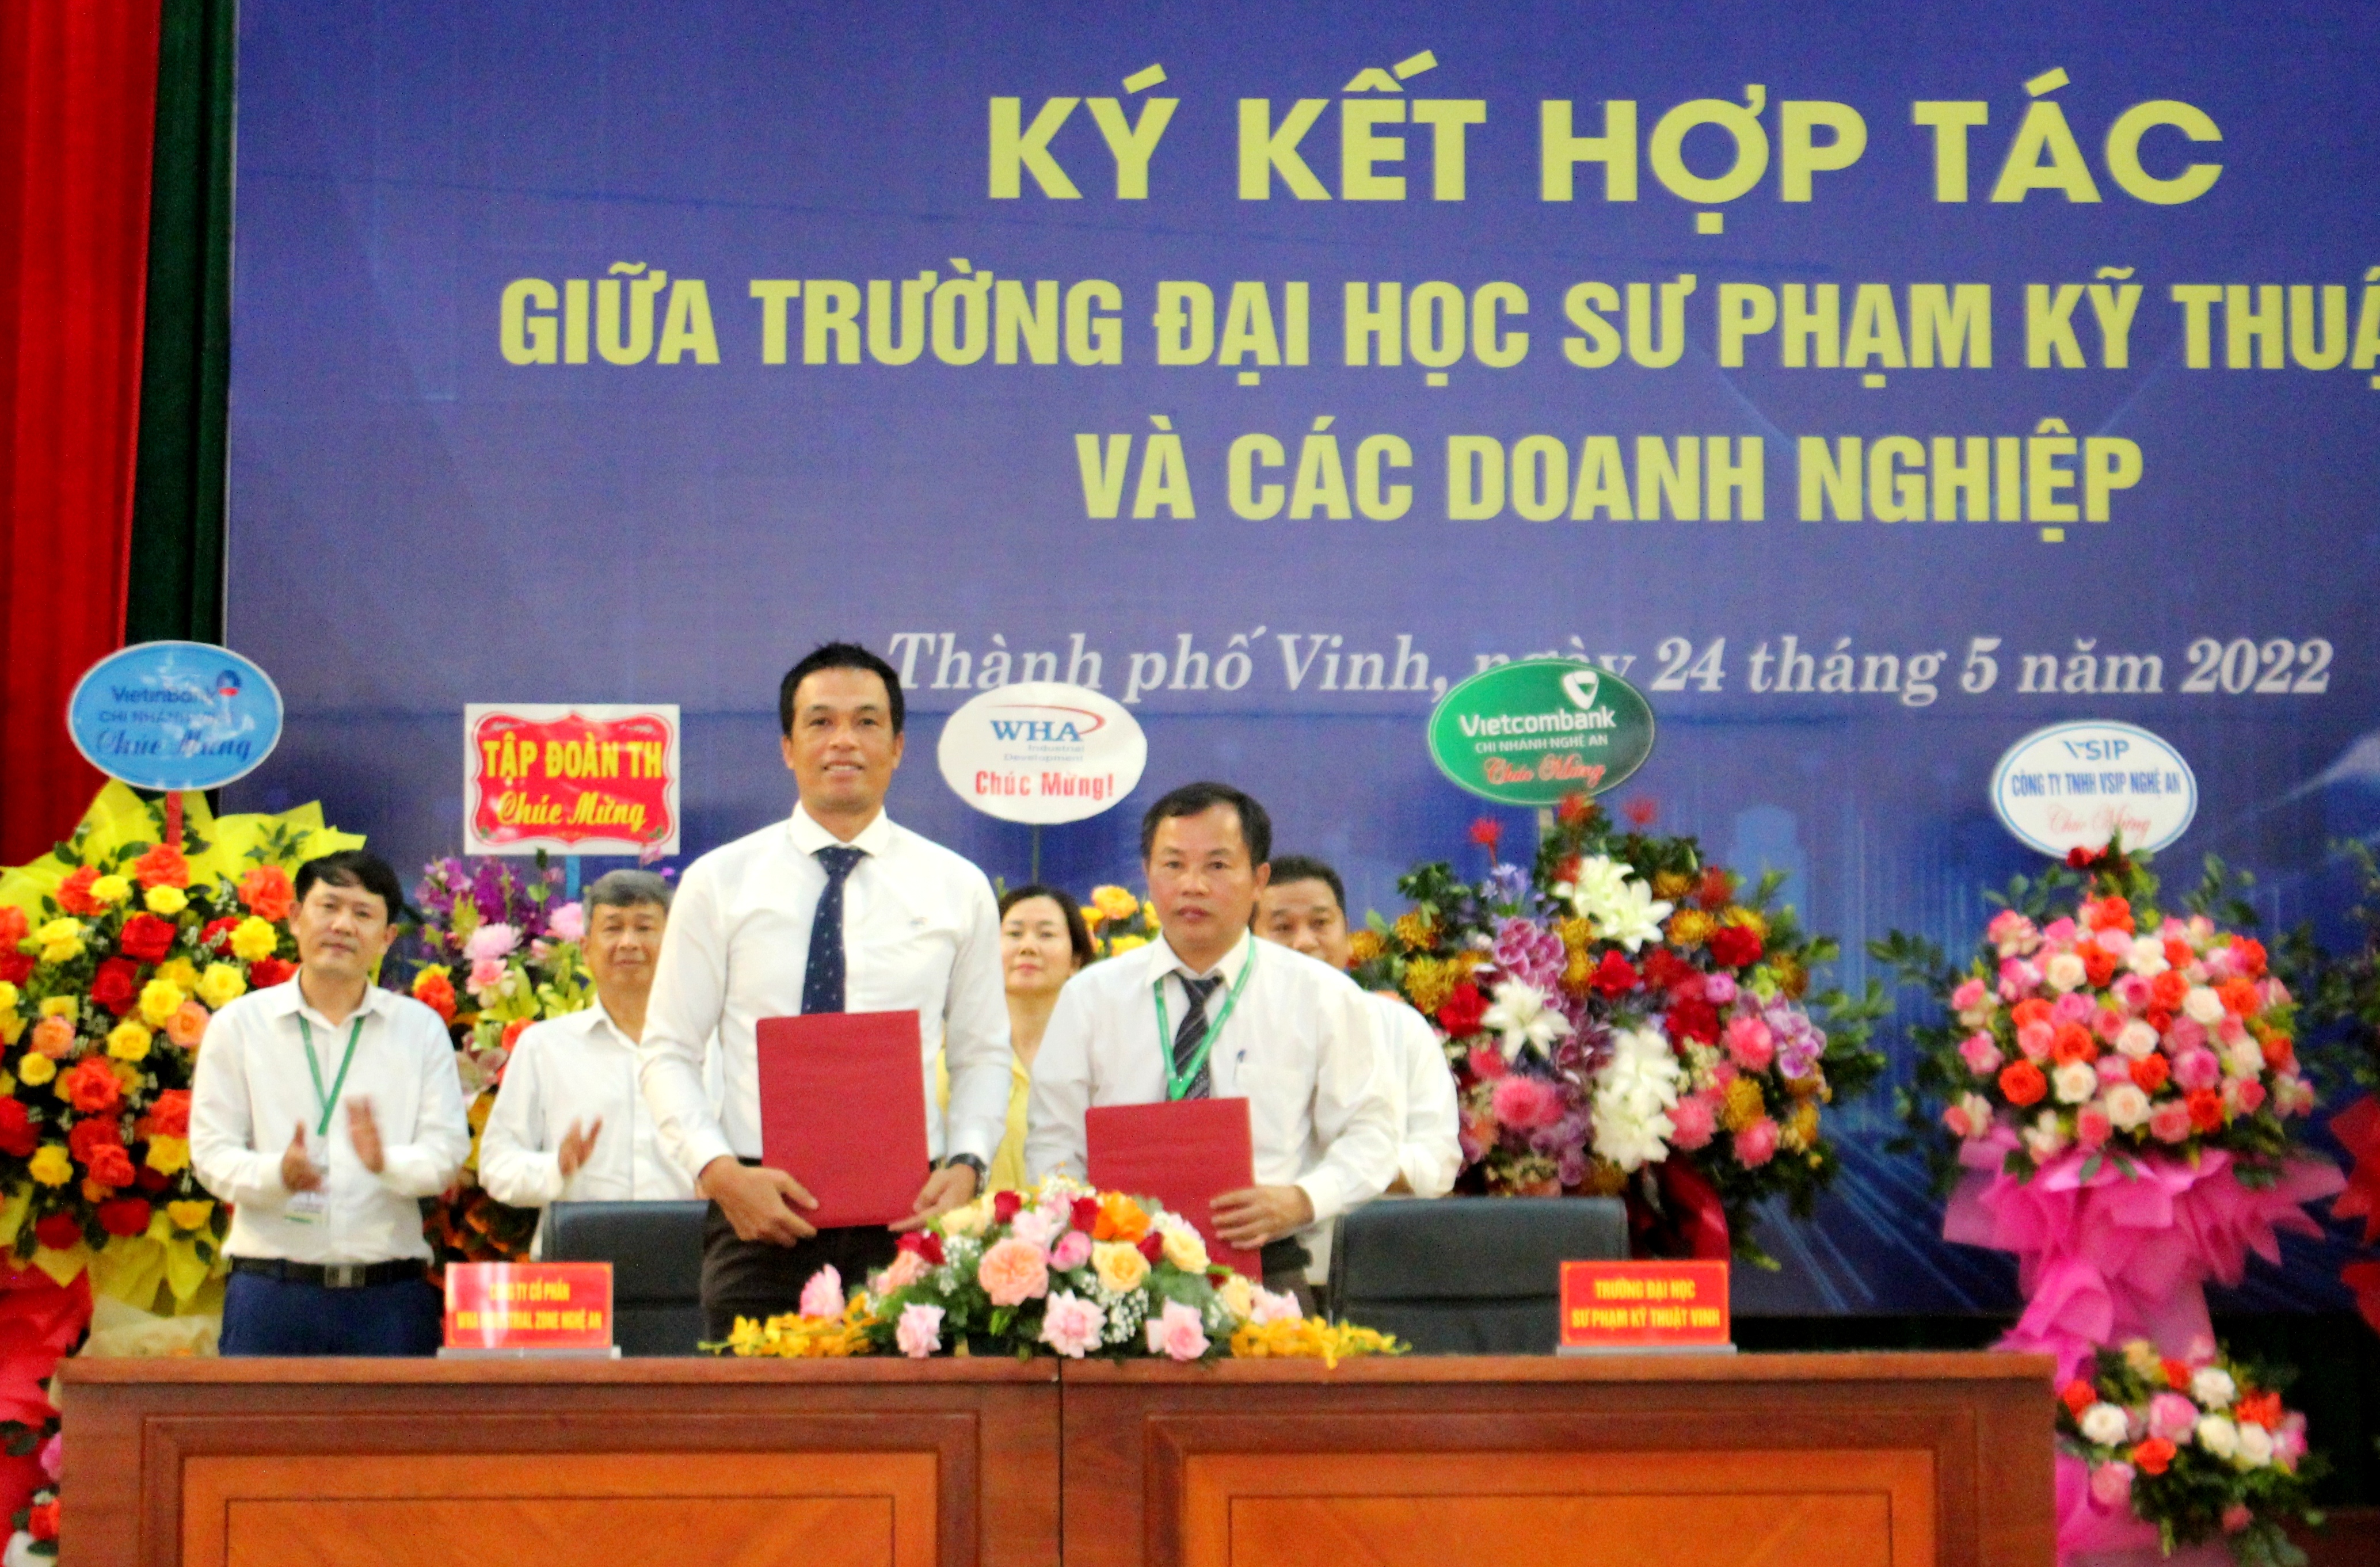 WHA Industrial Zone Nghe An JSC Signs MoU with Vinh University of Technology Education for Academic Cooperation on Training and Recruitment